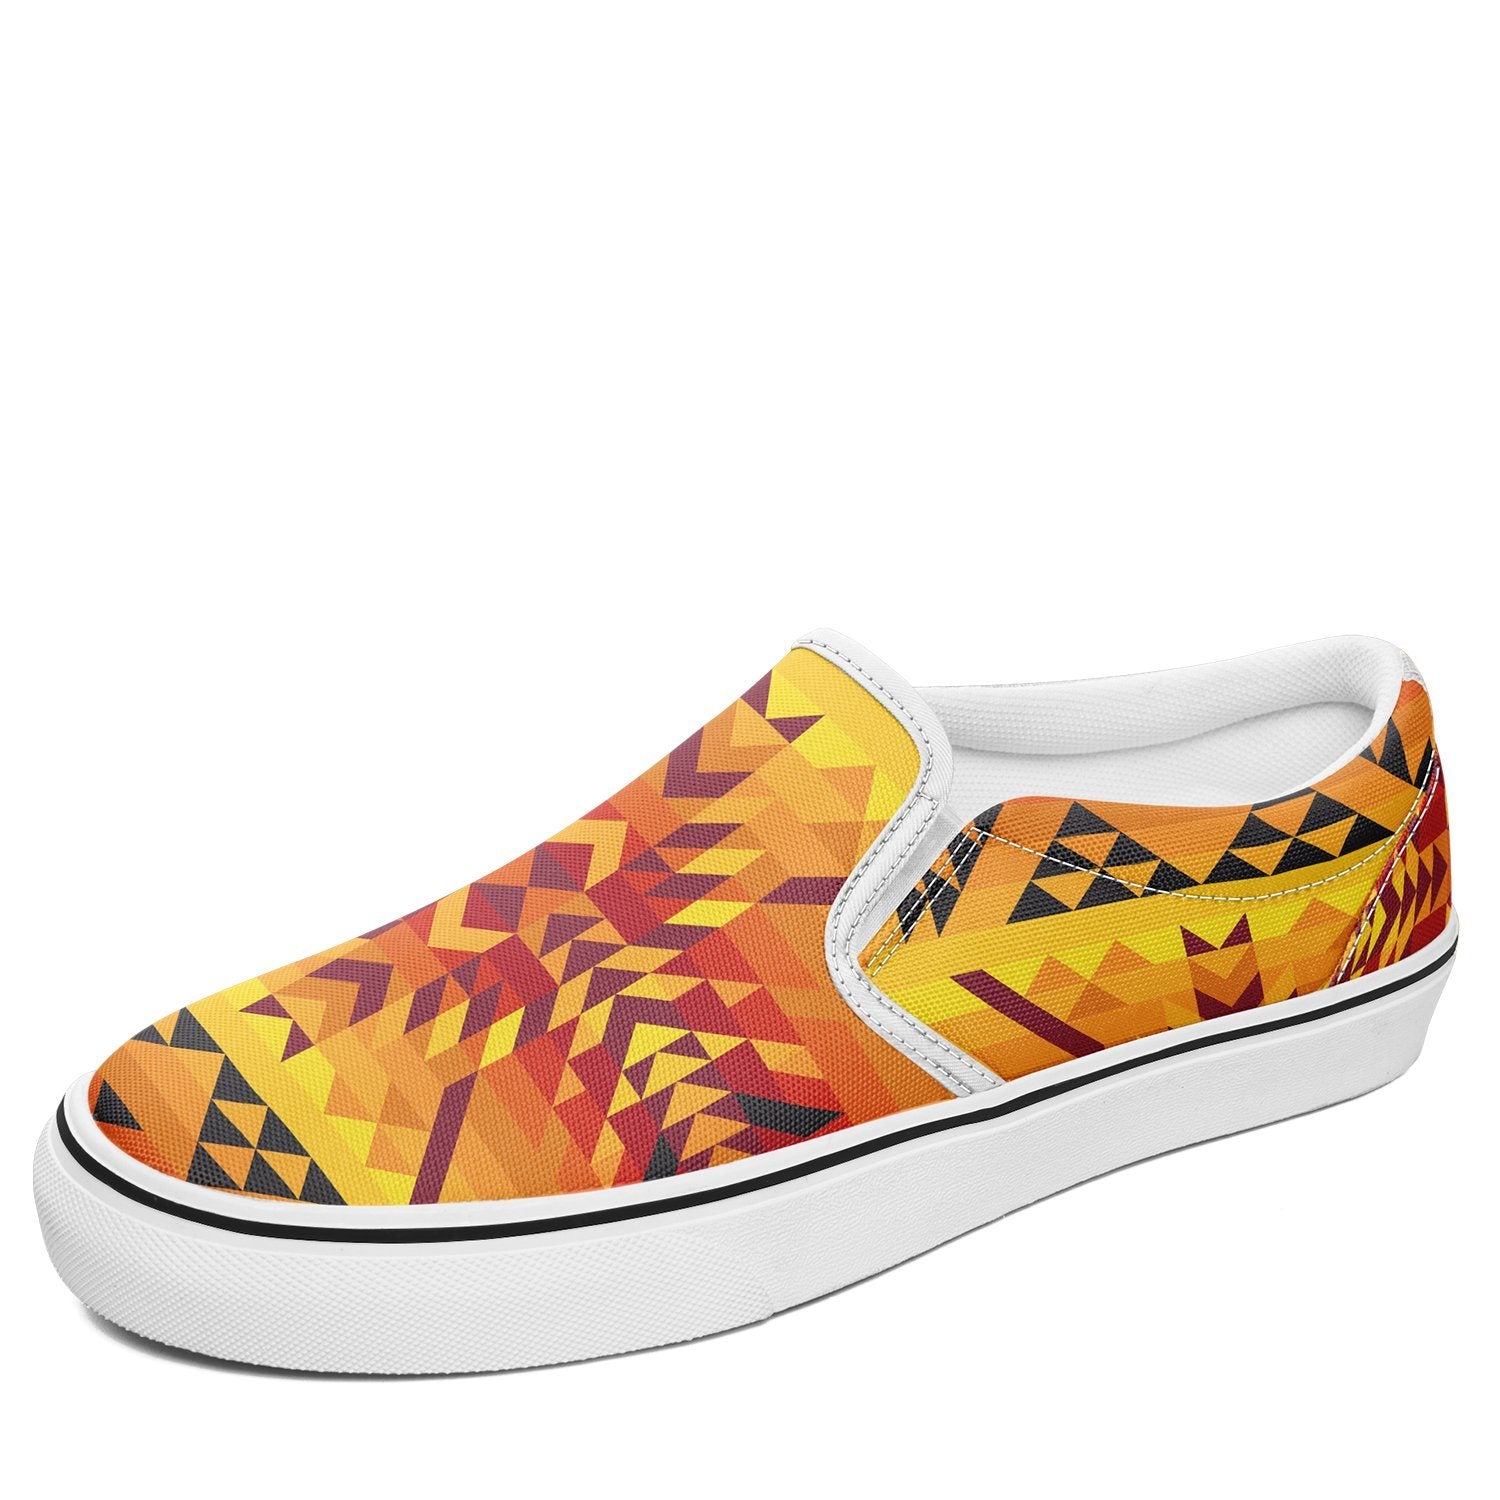 Desert Geo Yellow Red Otoyimm Canvas Slip On Shoes otoyimm Herman US Youth 1 / EUR 32 White Sole 